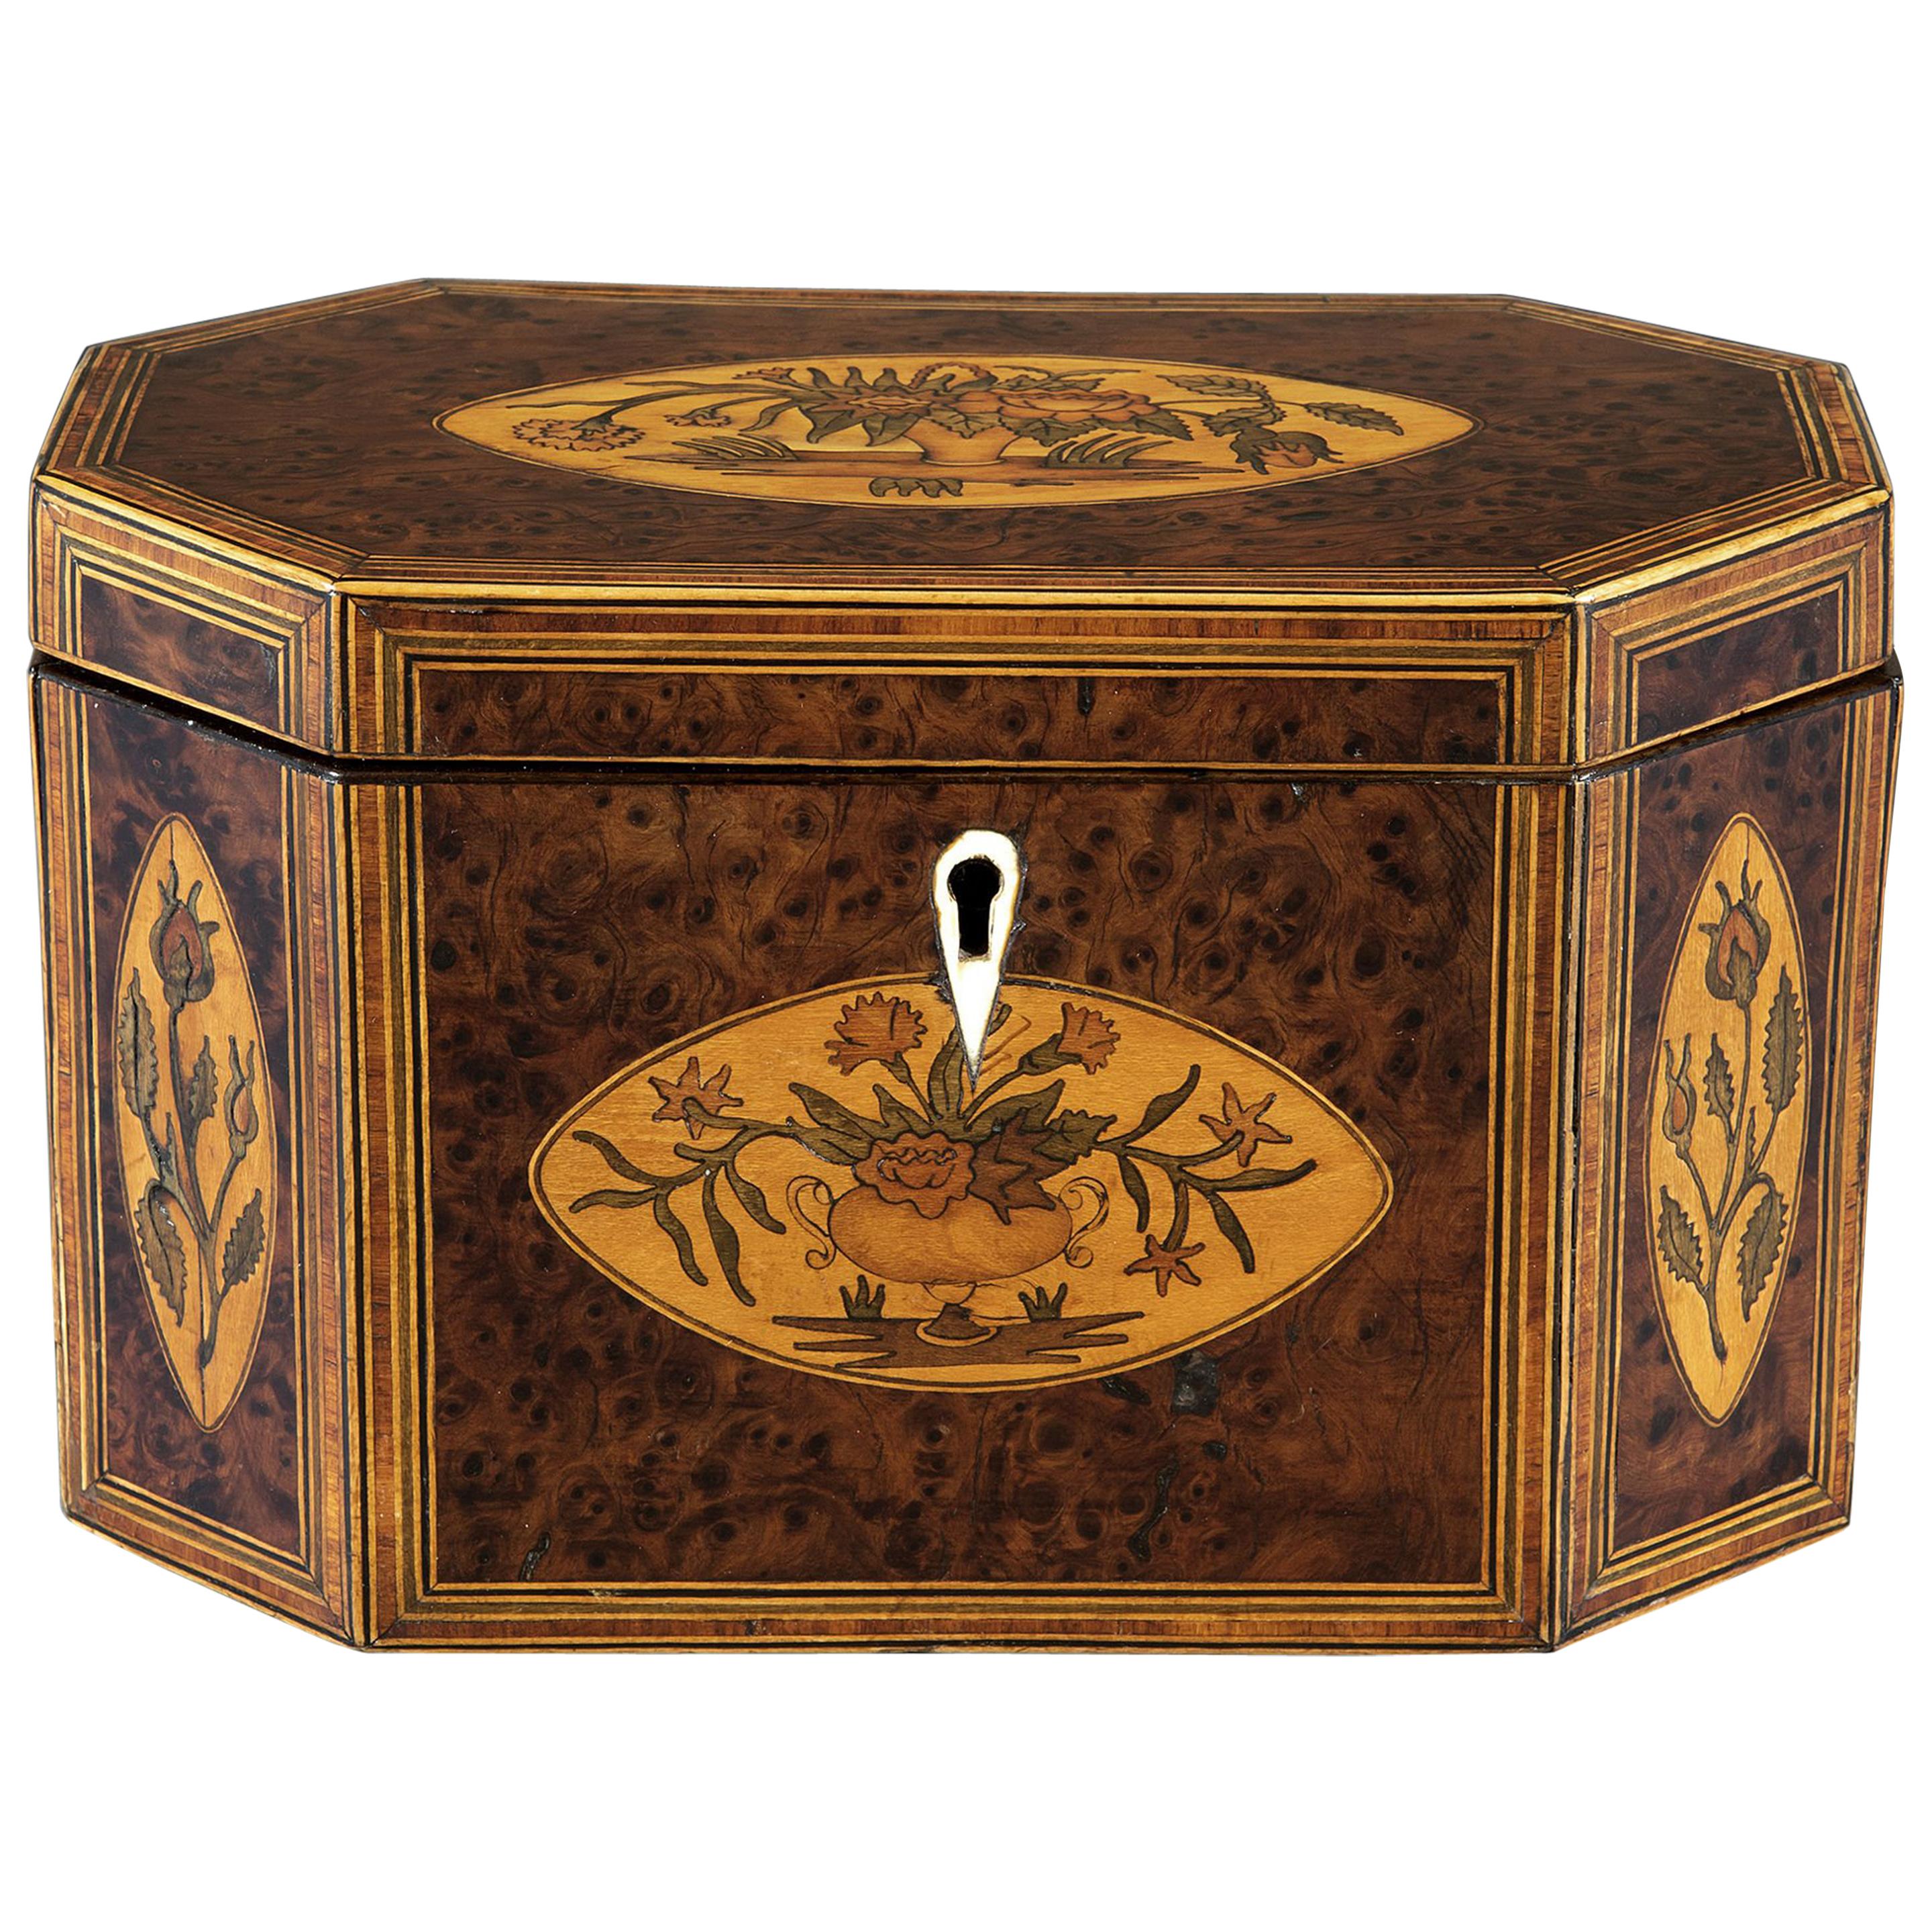 Late George III Period Burr Yew Inlaid Floral Marquetry Octagonal Tea Caddy For Sale